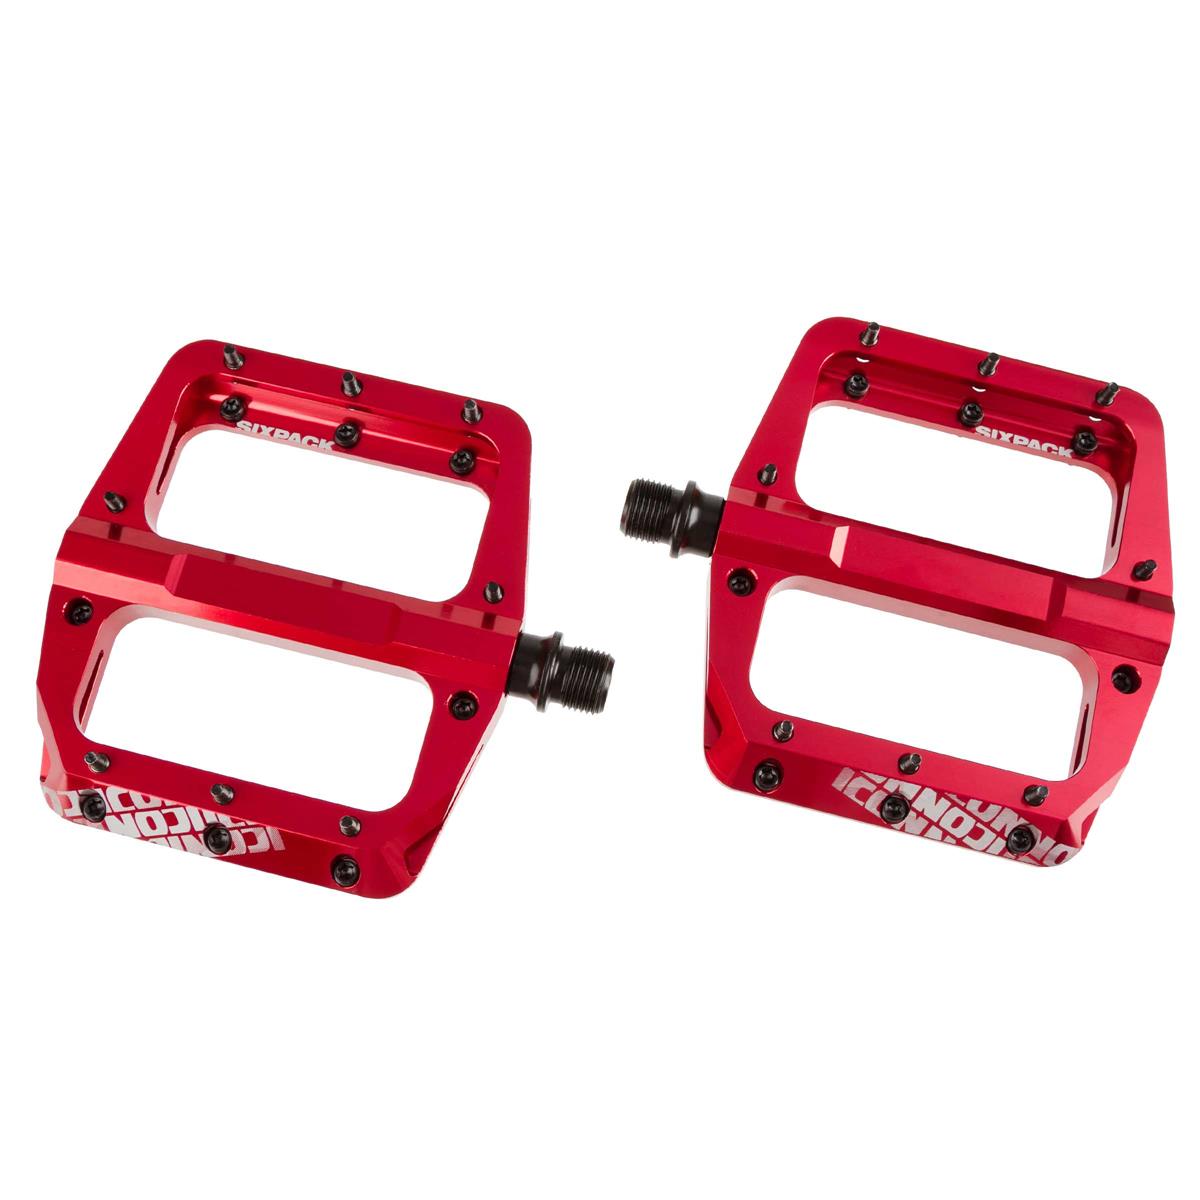 Sixpack Pedals Icon 2.0 Red, 100x110 mm, 32 M4 Torx Pins, 1 Pair